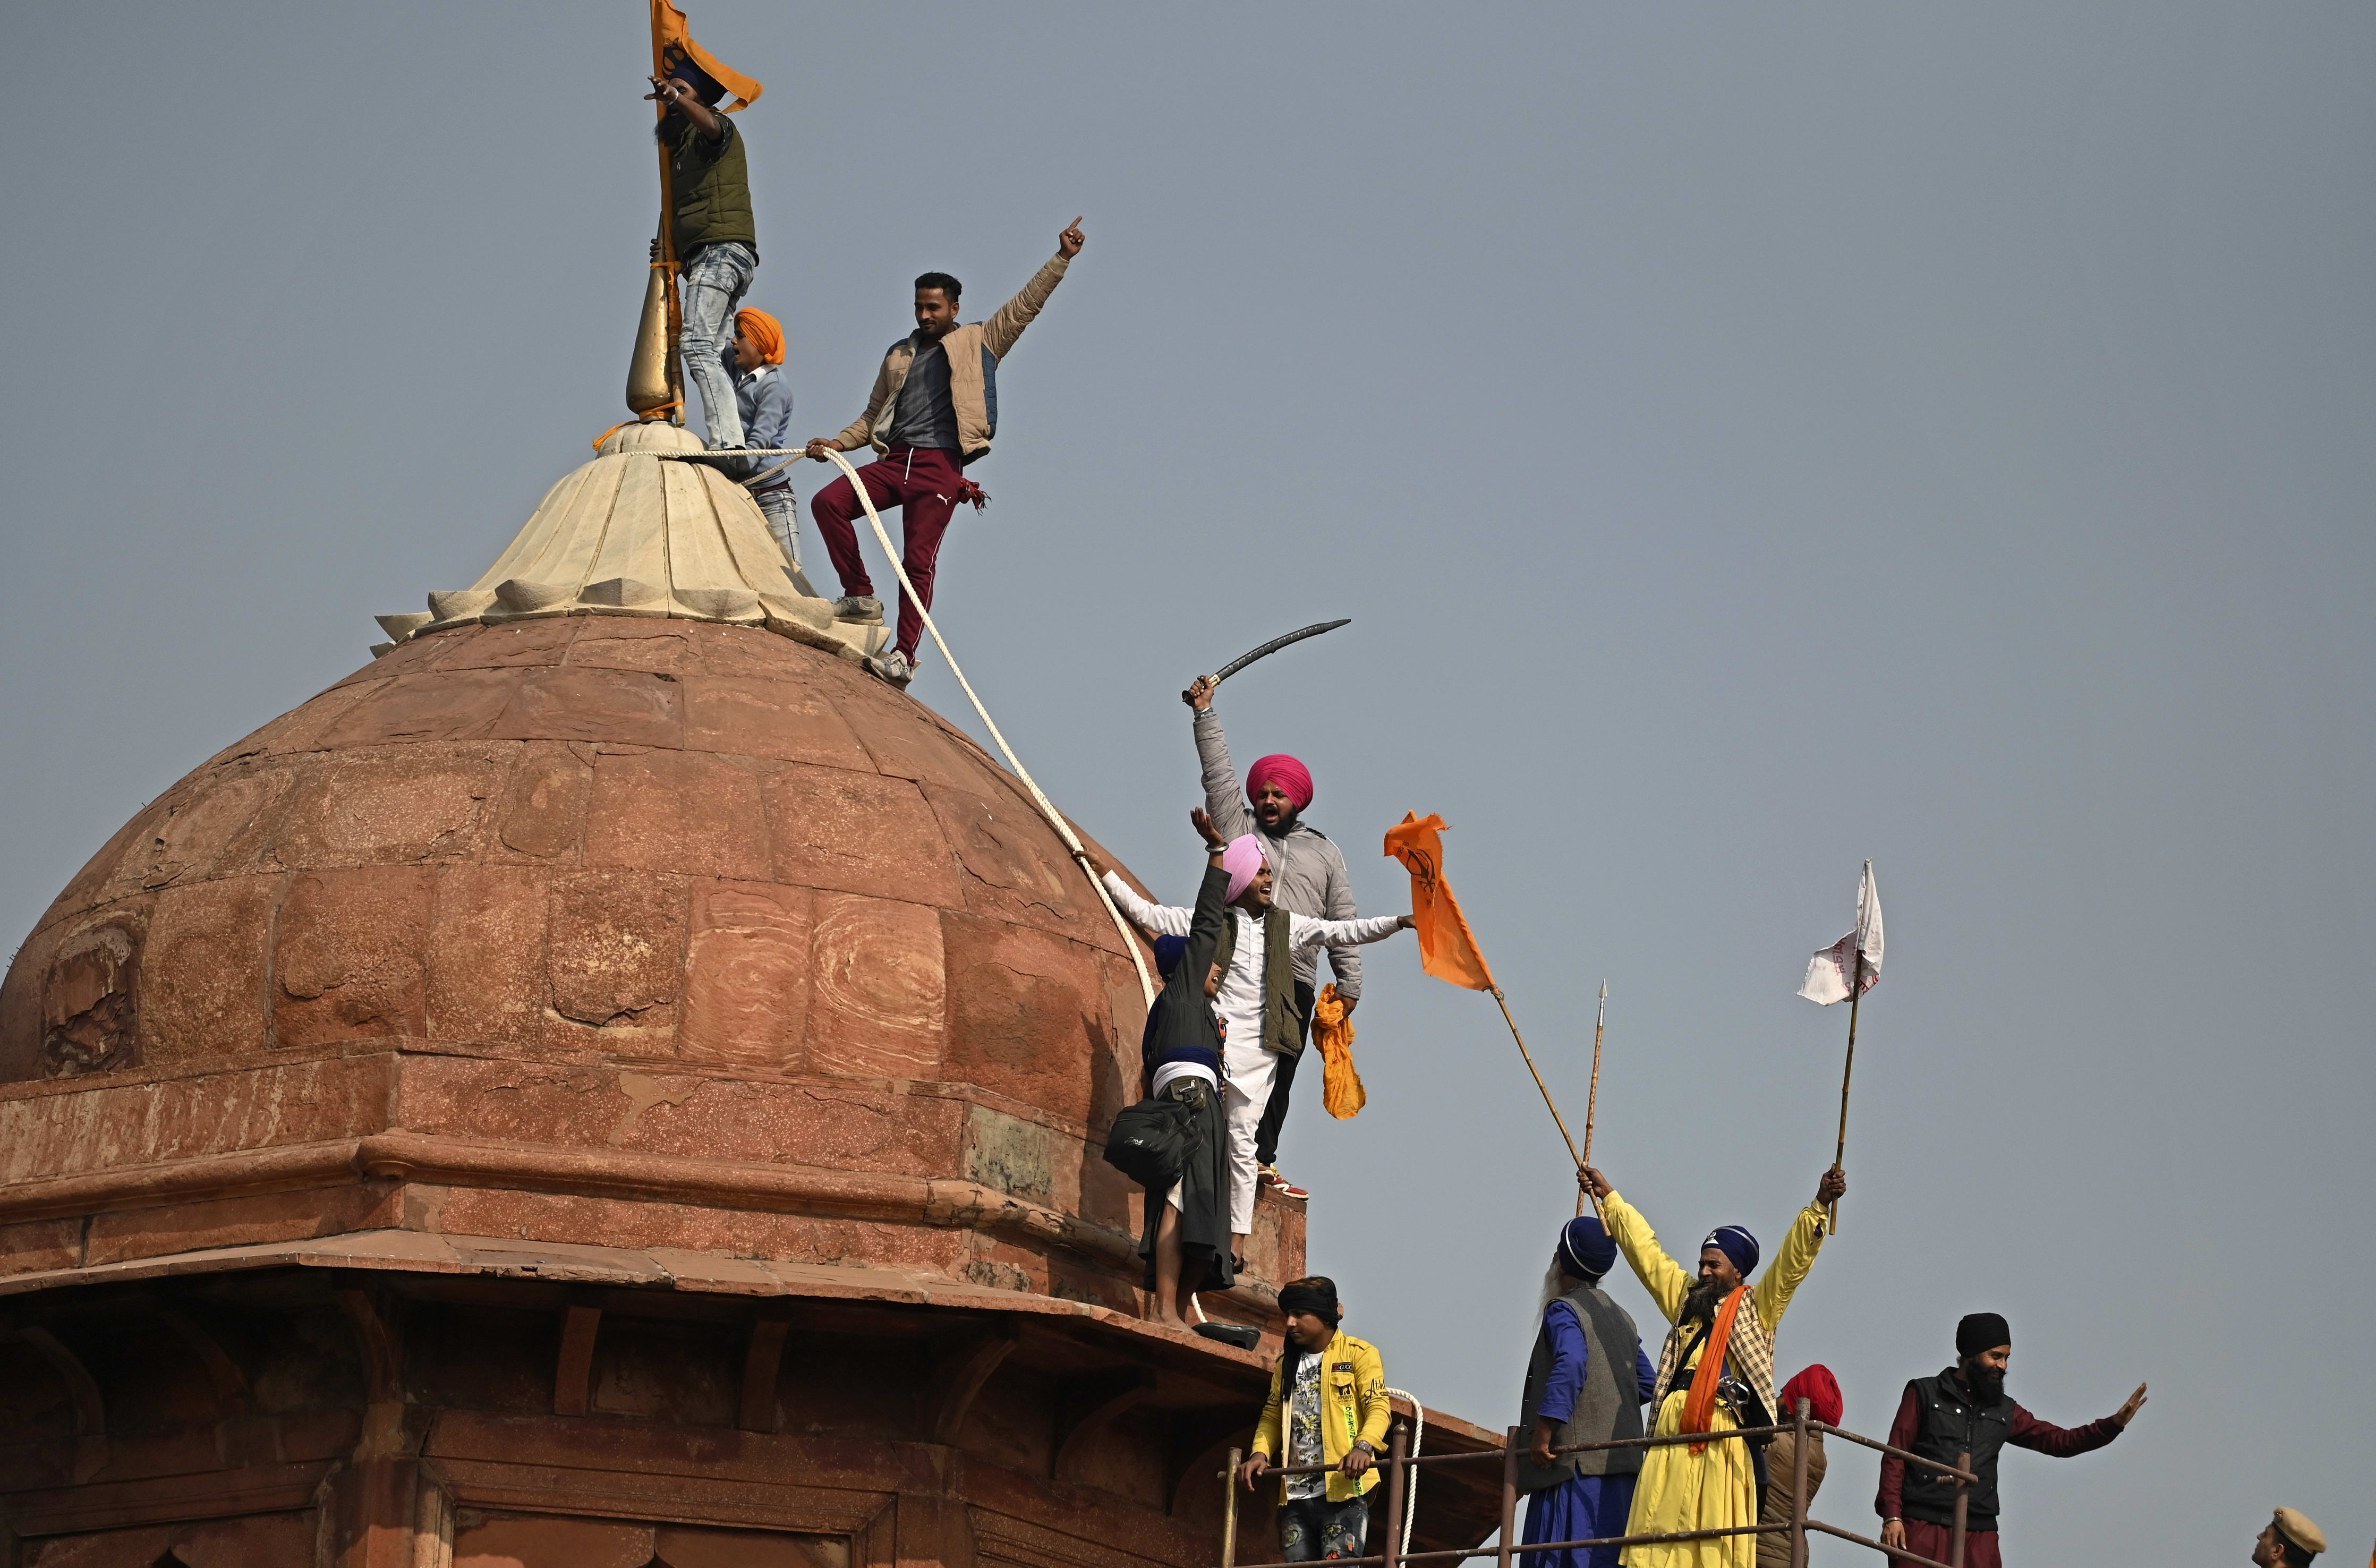 Protesters climb on a dome at the ramparts of the Red Fort as farmers demonstrate against the central government's recent agricultural reforms in New Delhi on January 26, 2021.